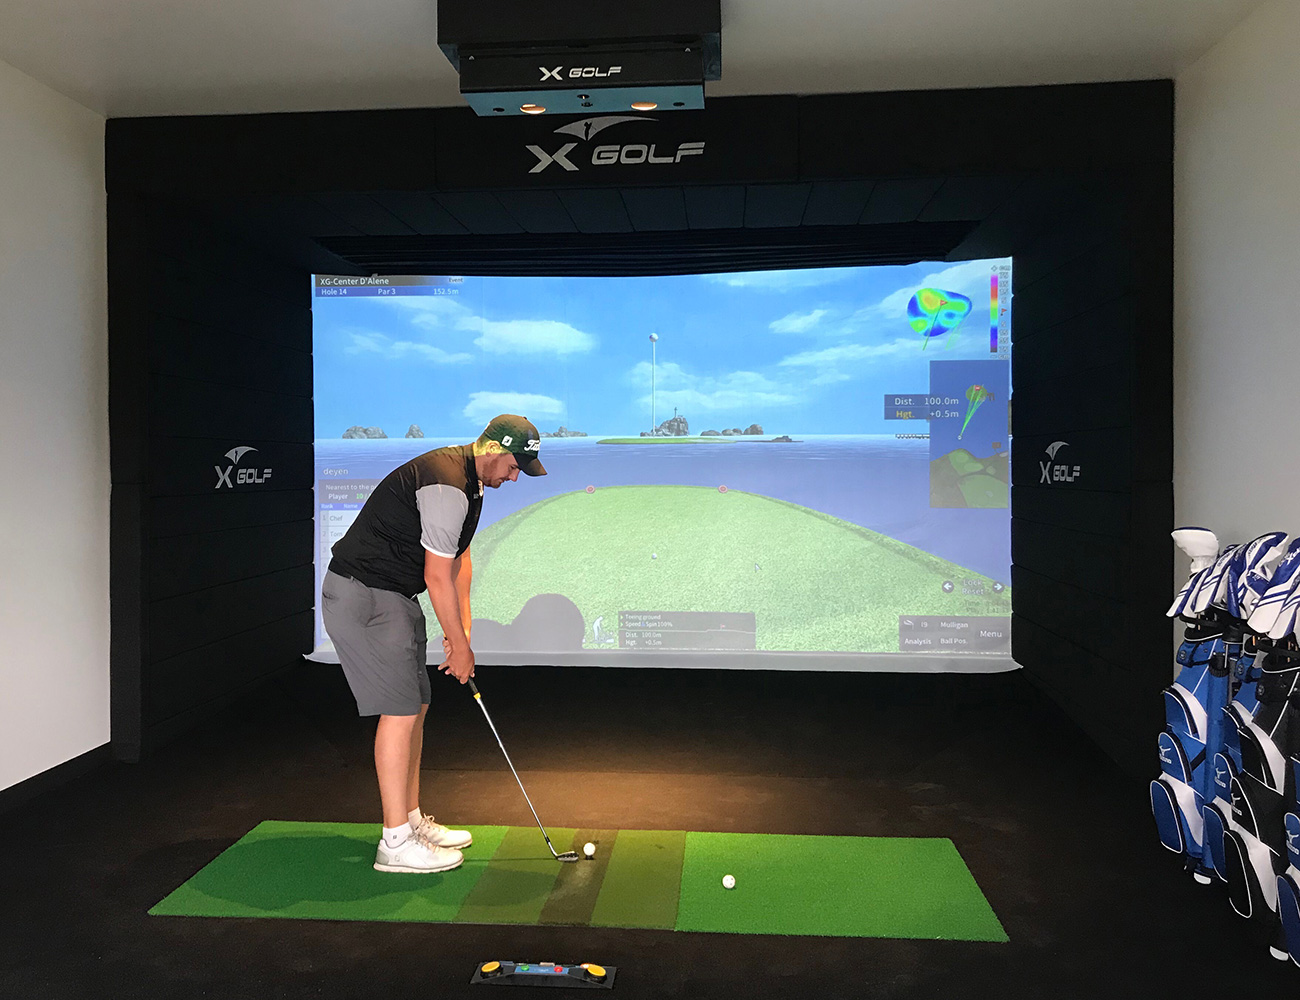 Hone your game or simply have some fun with X Golf.